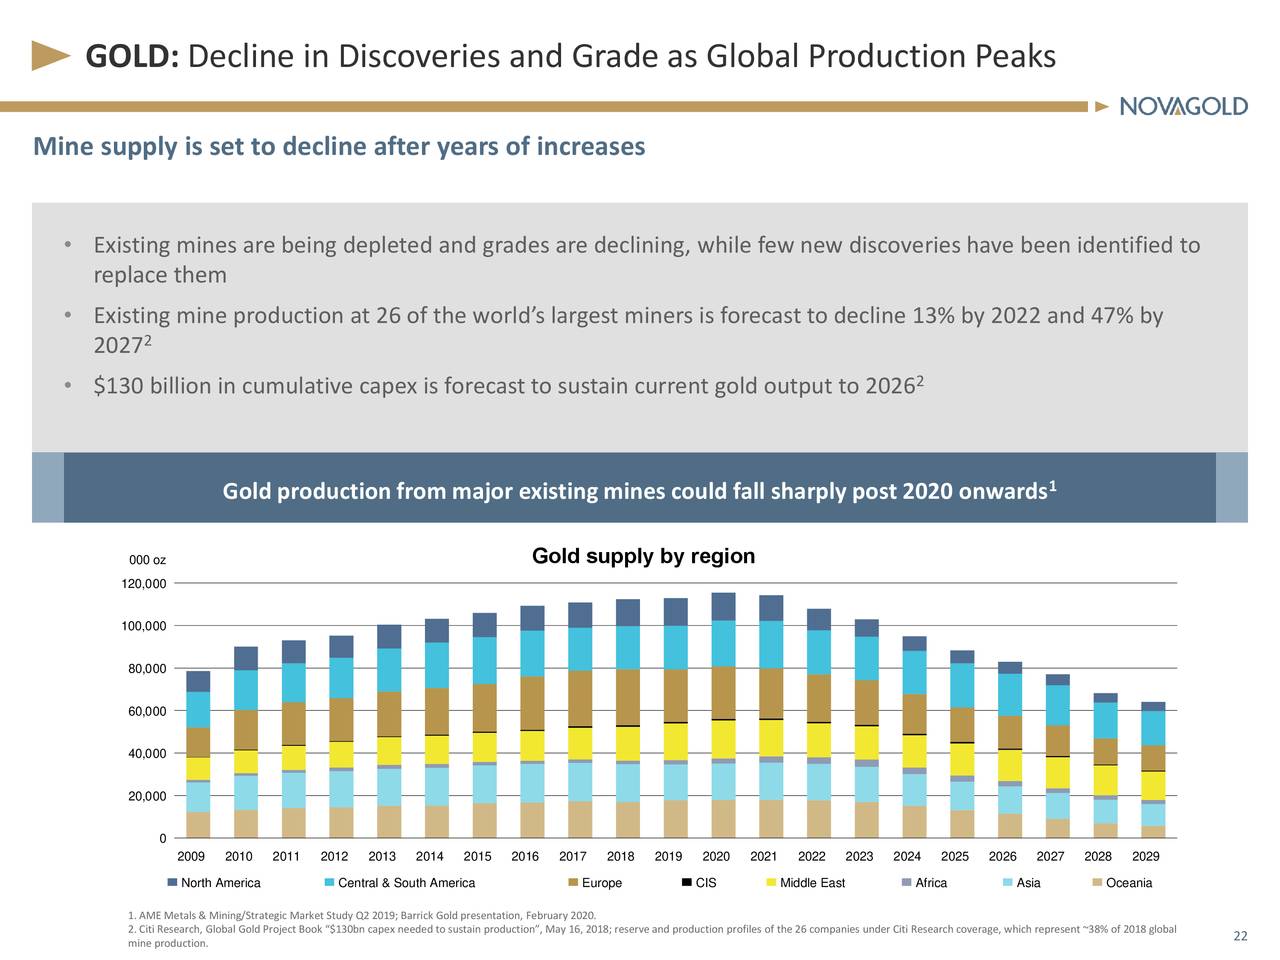 GOLD: Decline in Discoveries and Grade as Global Production Peaks